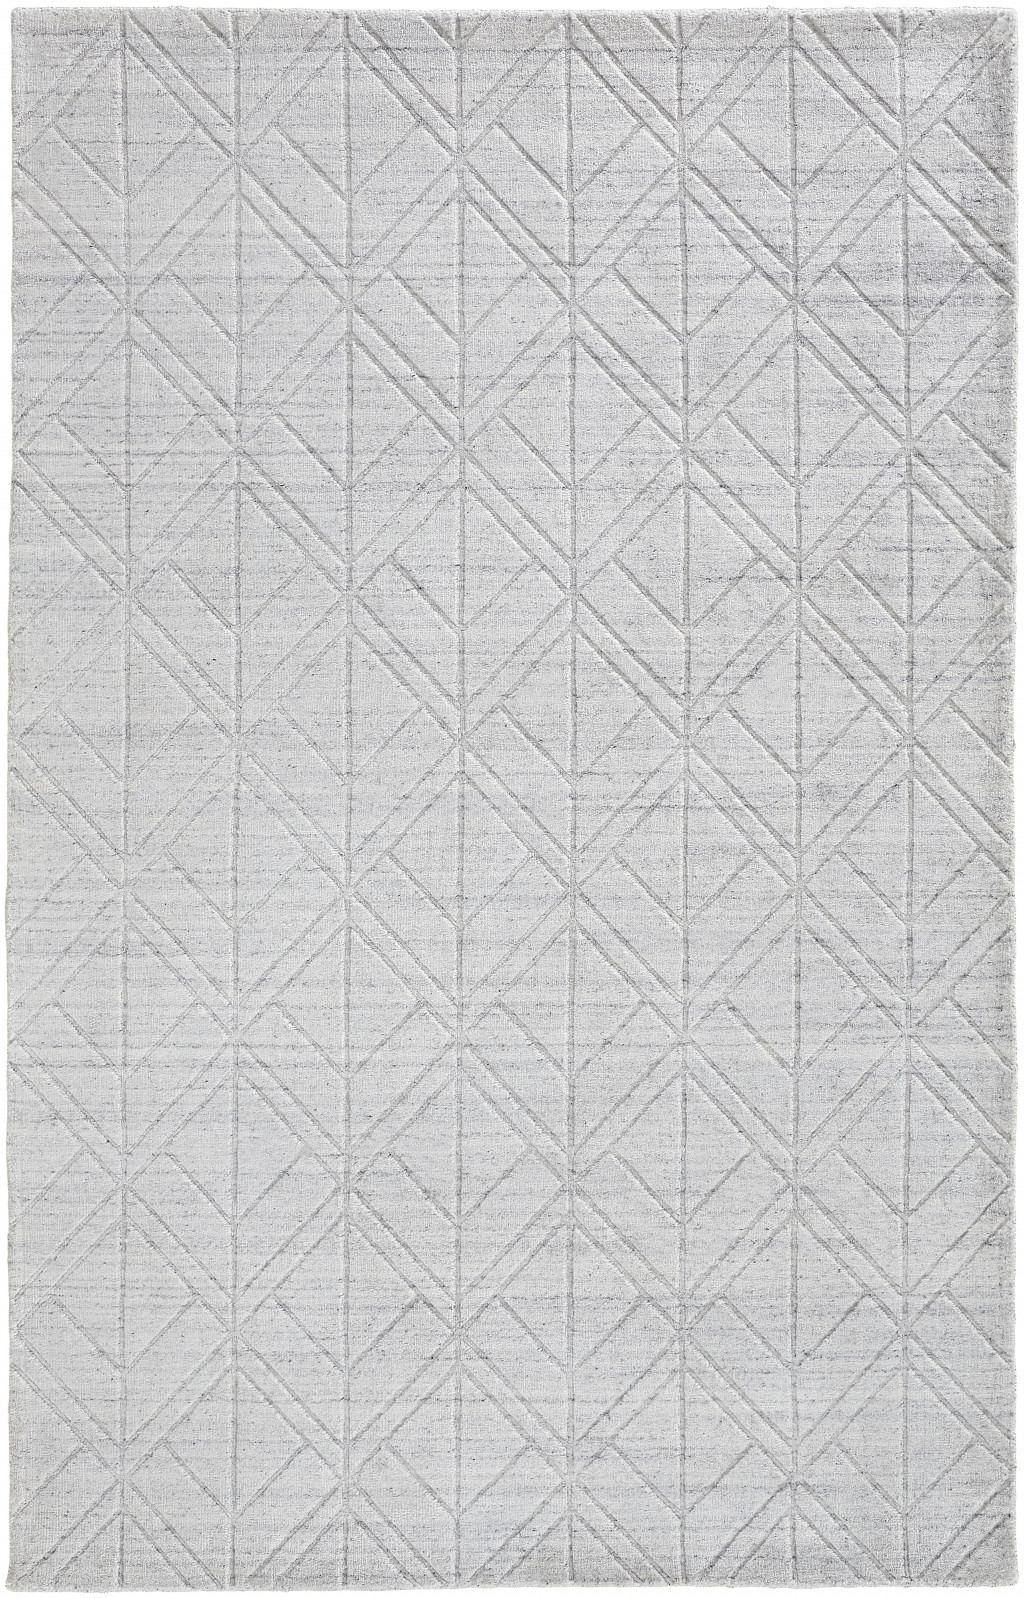 10' X 14' White And Silver Striped Hand Woven Area Rug-514781-1